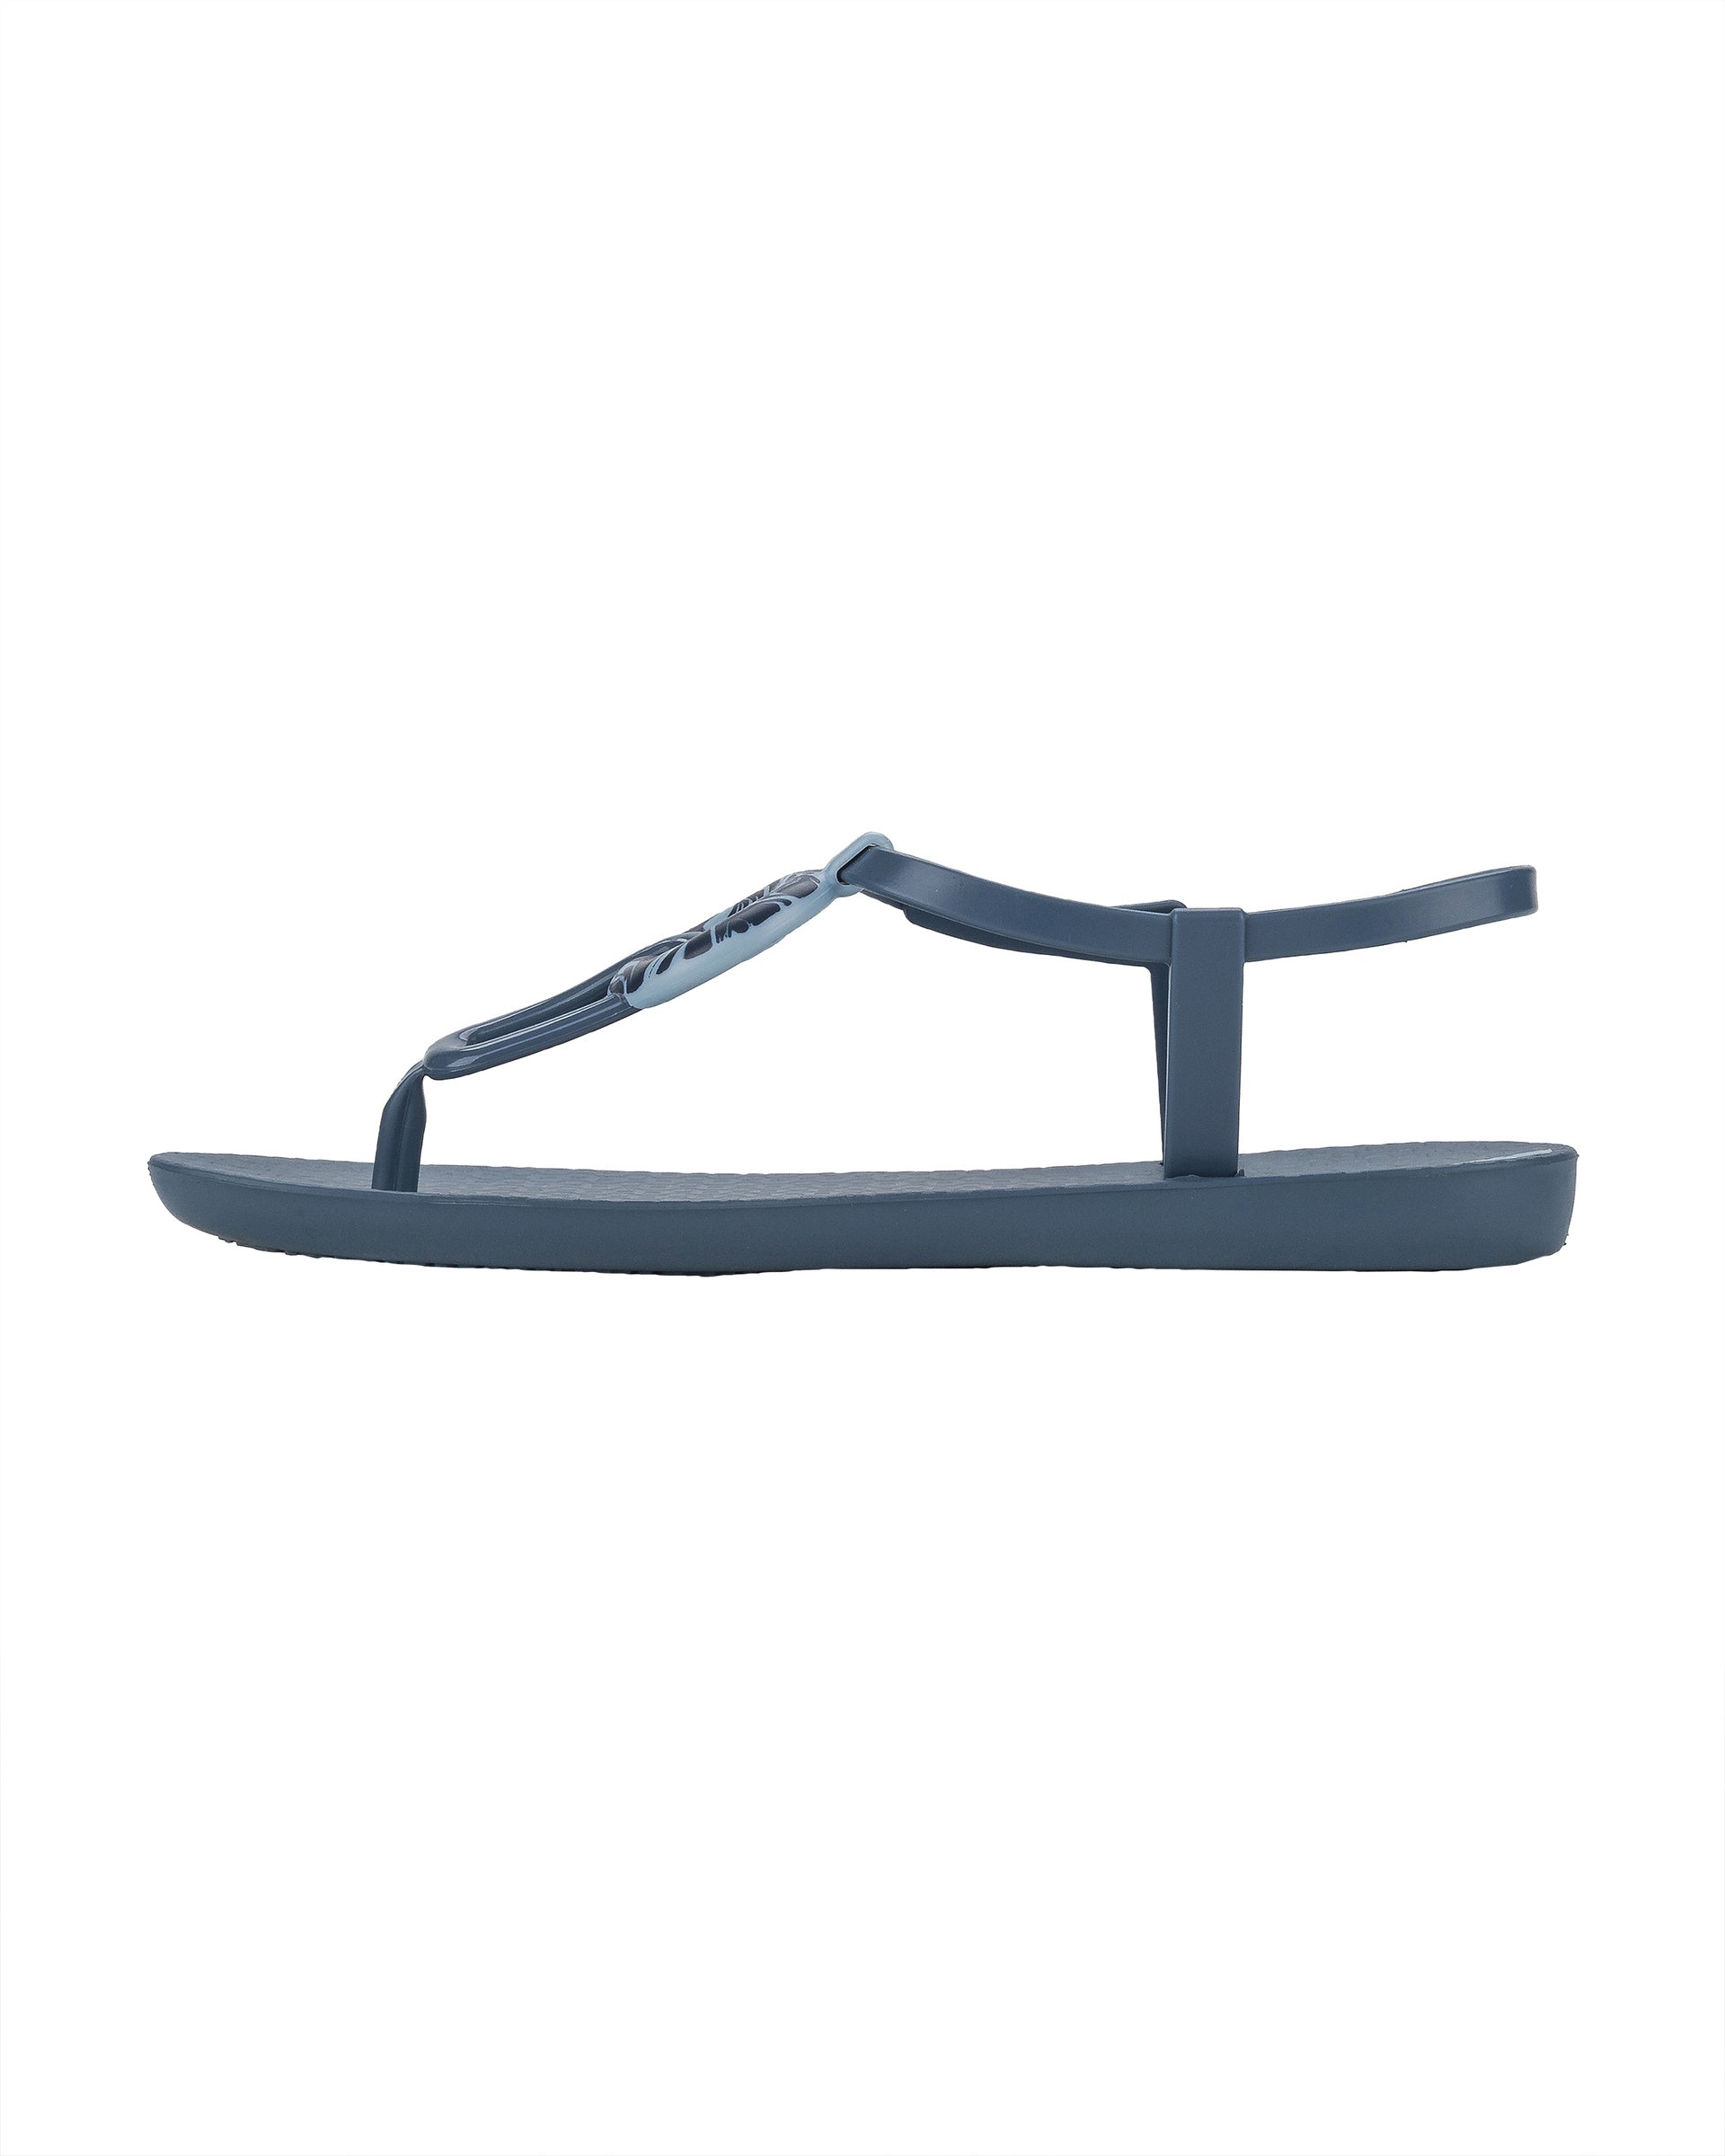 Inner side view of a blue Ipanema Class Marble women's t-strap sandal.